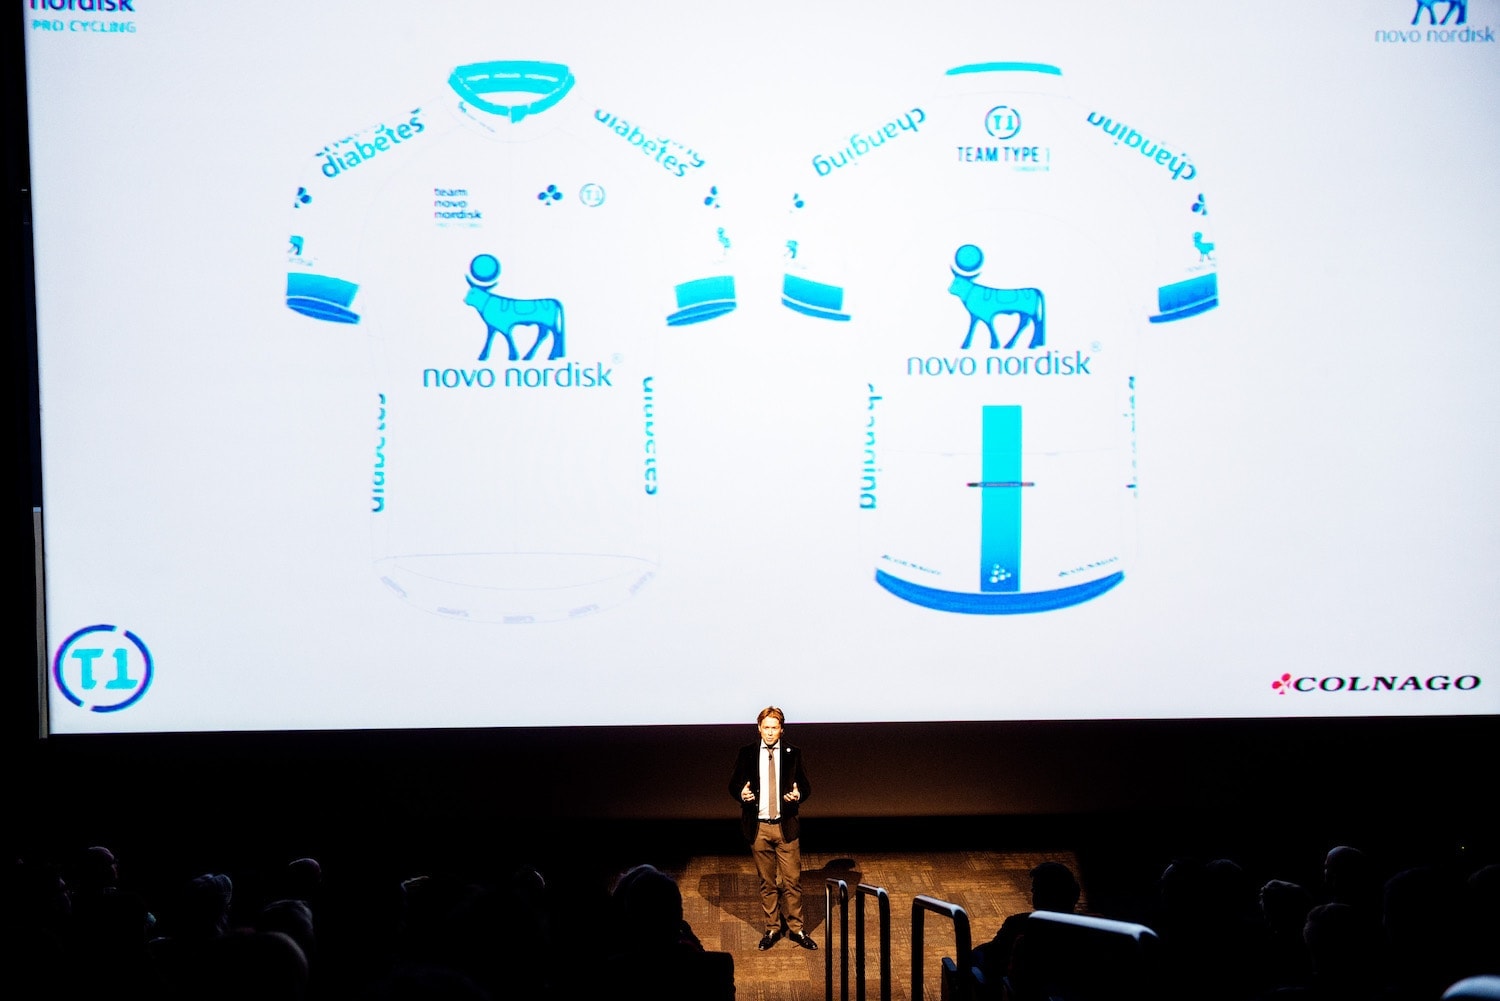 Phil Southerland on stage with a large image of the new Team Novo Nordisk jersey displayed above